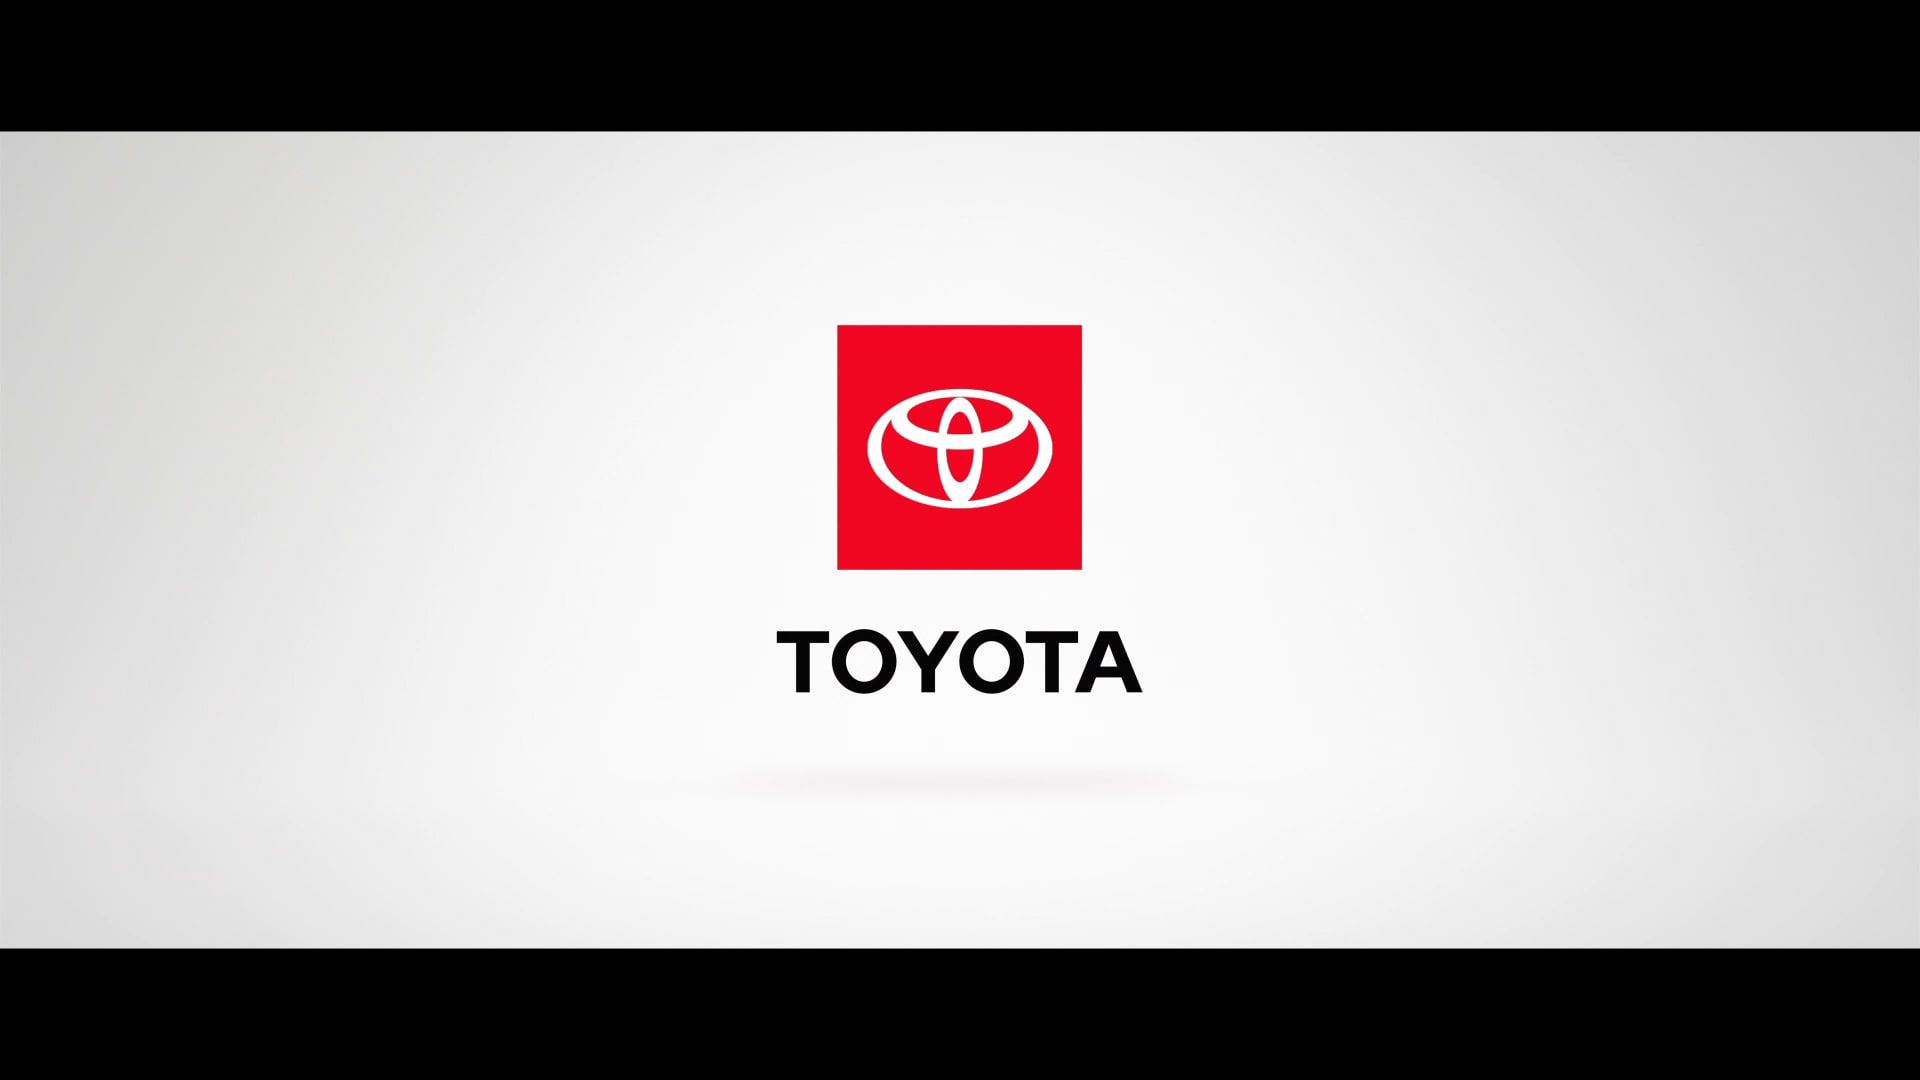 Toyota logo on white background in letterbox format with a black band at top and bottom of the image.